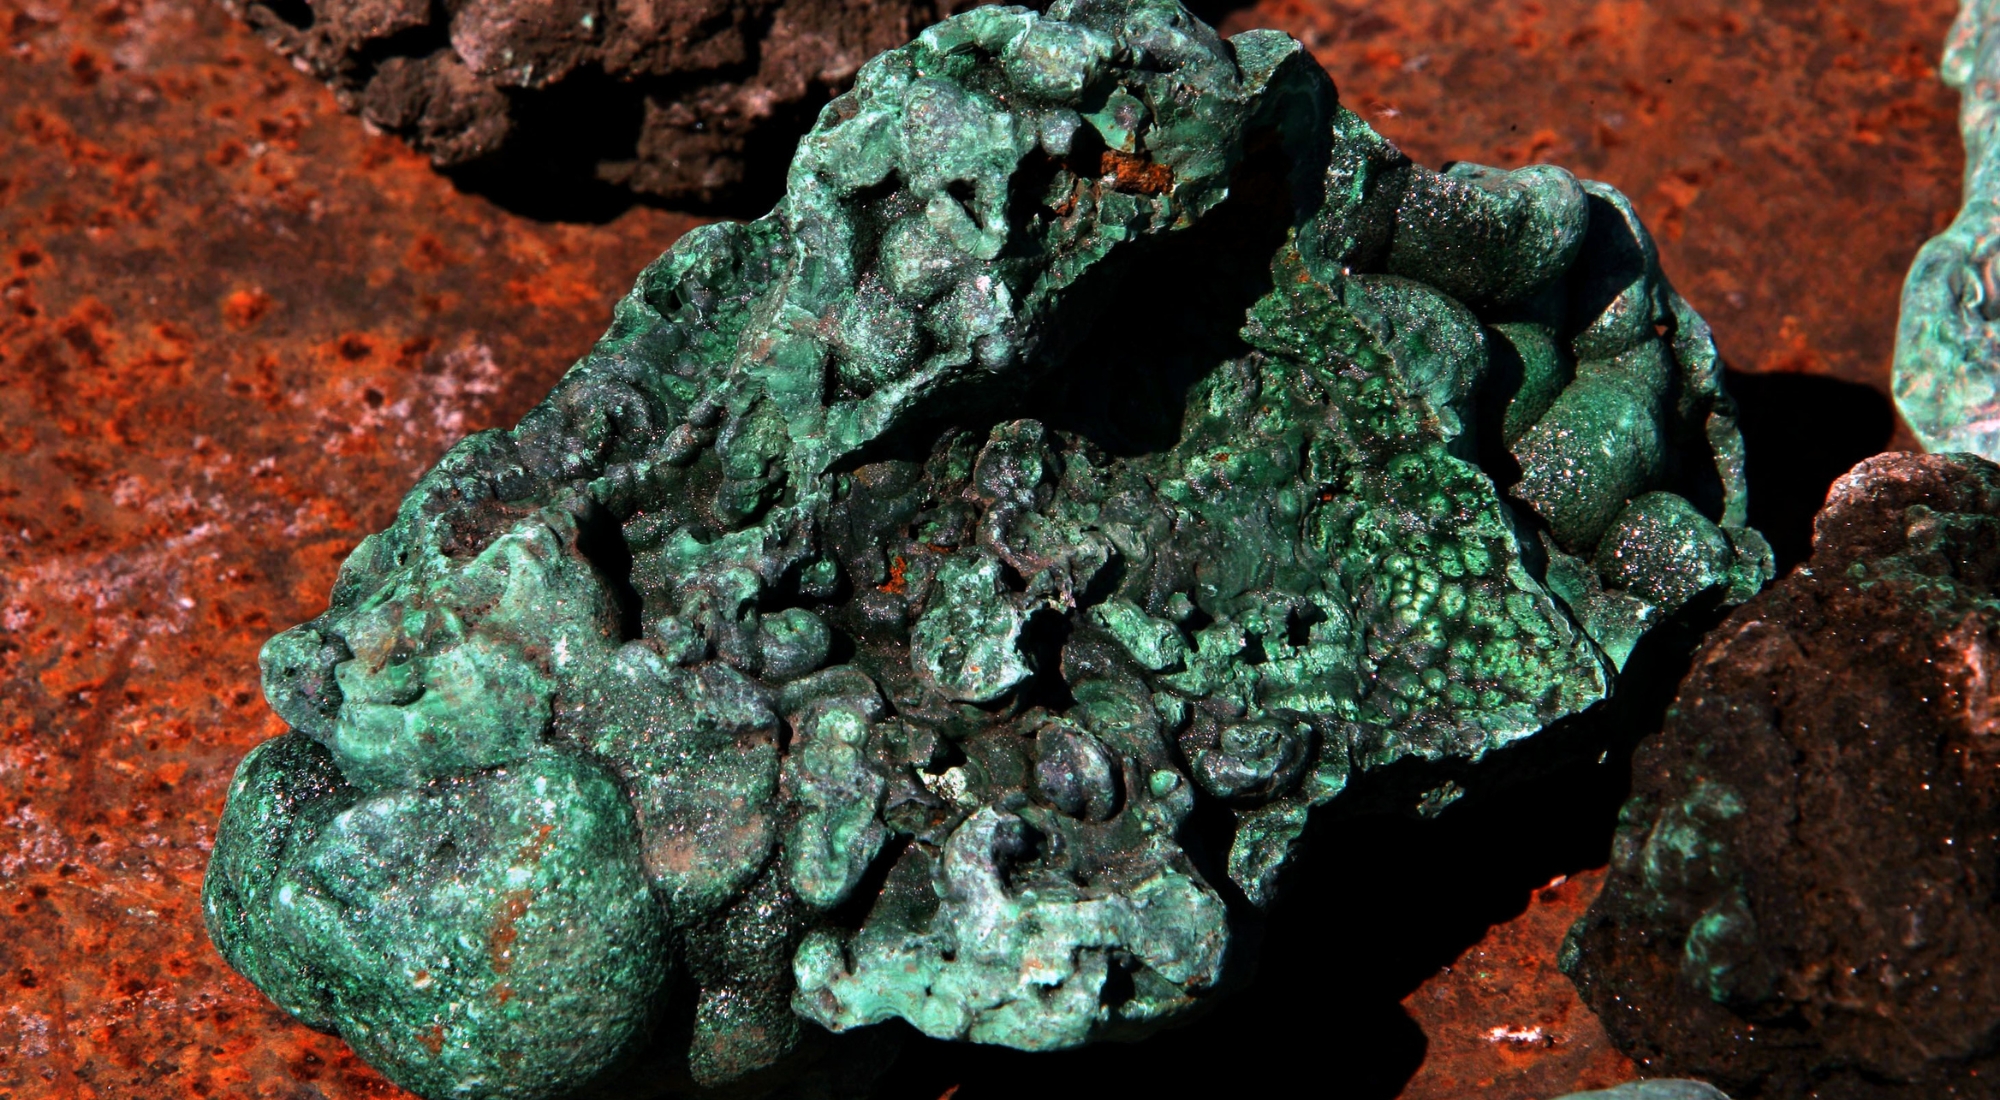 A piece of copper. The DRC is potentially one of the richest mining countries in Africa. The copper, cobalt and diamond mining industries have the potential to be the largest on the continent, while the gold mining industry also has excellent potential. The DRC's main copper and cobalt interests are dominated by Gecamines, the state-owned mining giant. (Photo by Olivier Polet/Corbis via Getty Images)